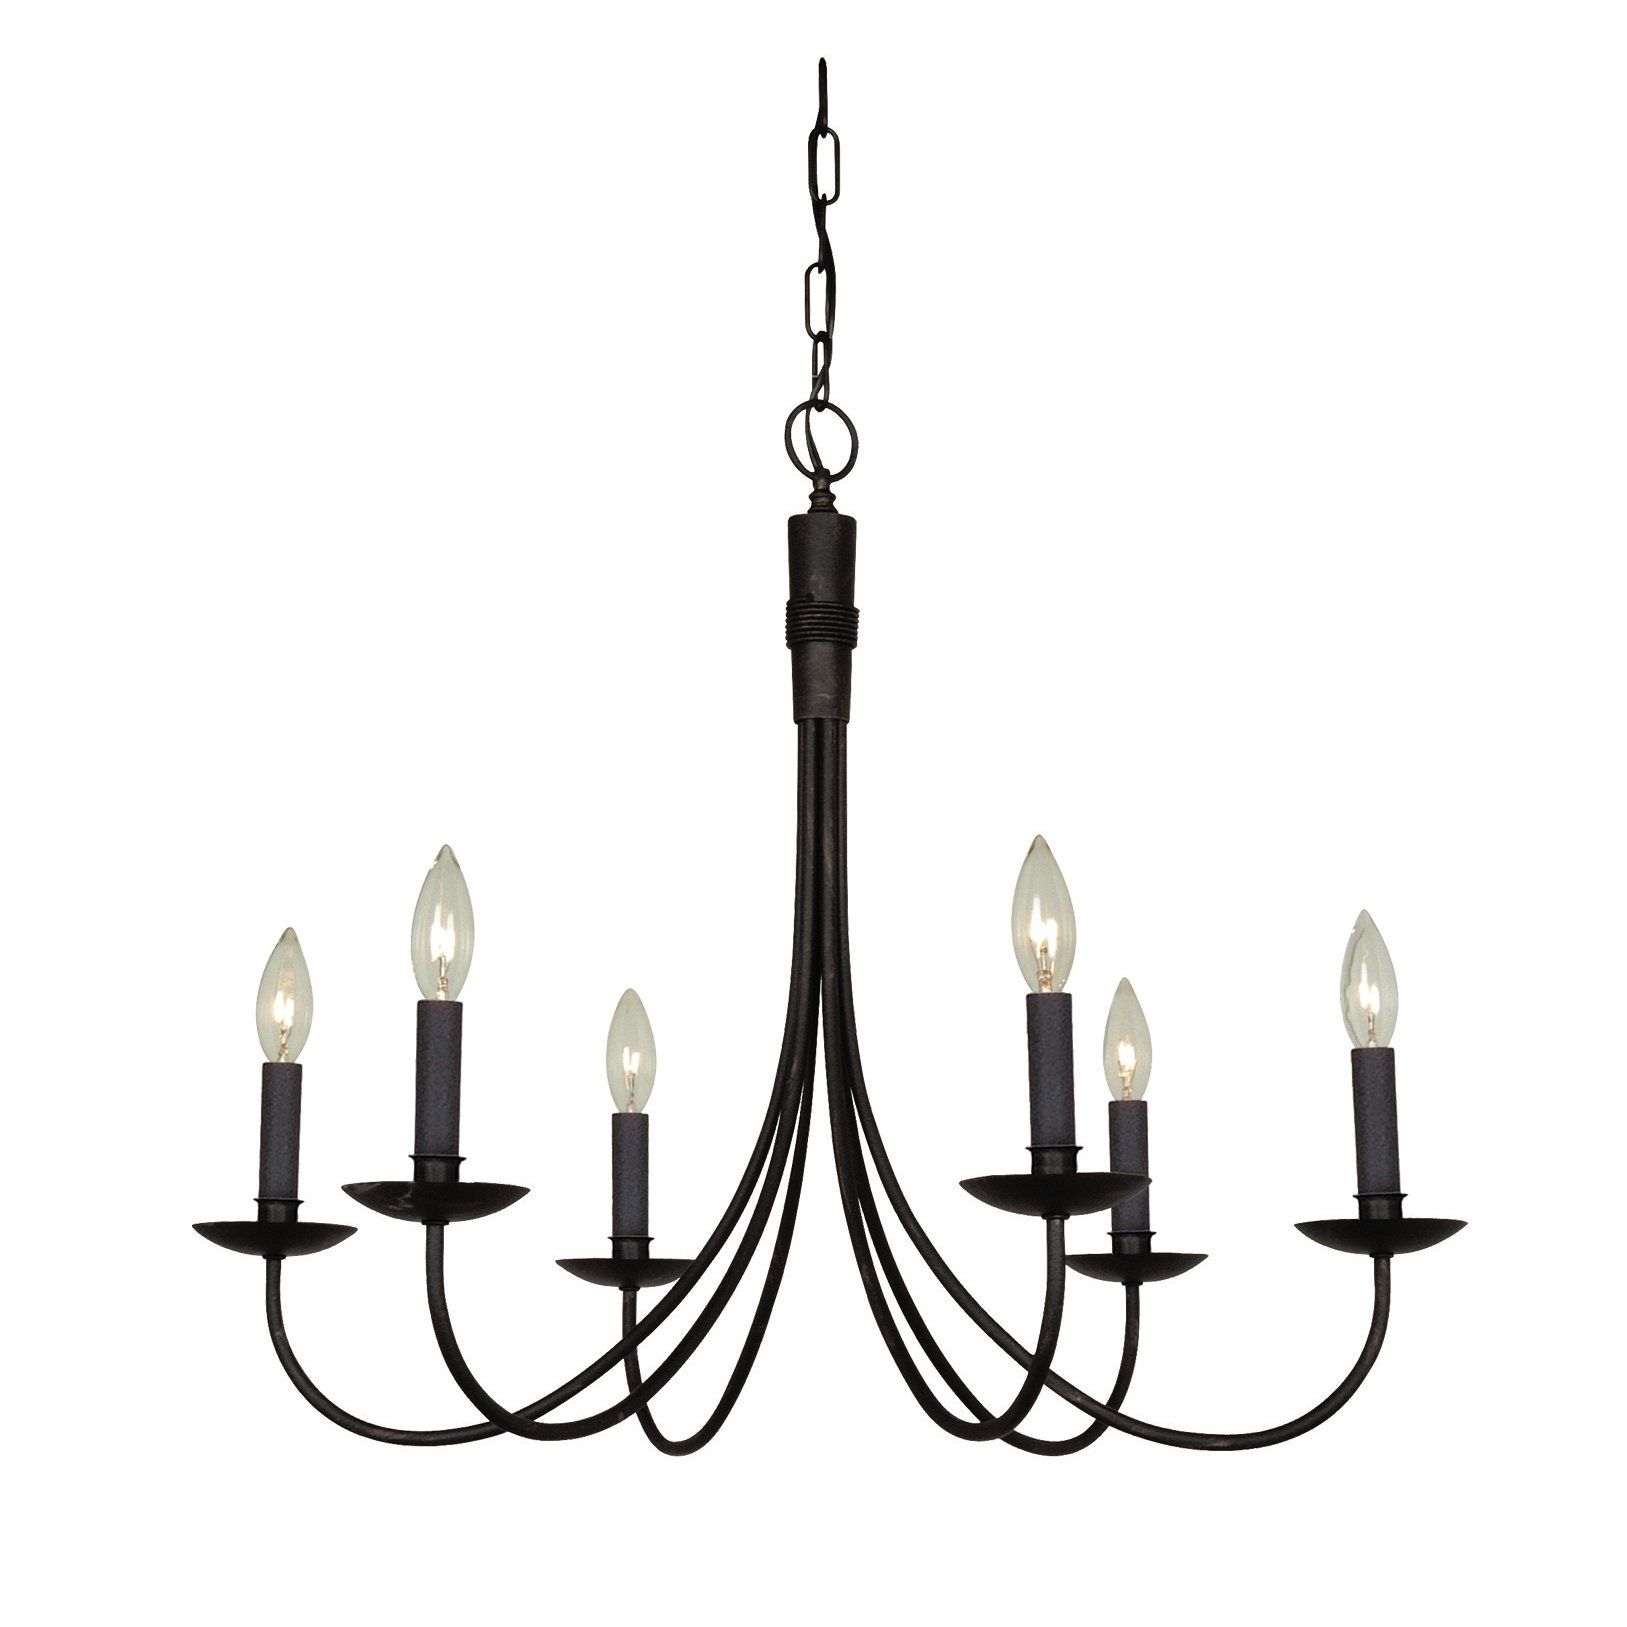 Dar Home Co Gavin 6 Light Candle Style Chandelier Reviews Intended For Candle Light Chandelier (Photo 2 of 12)